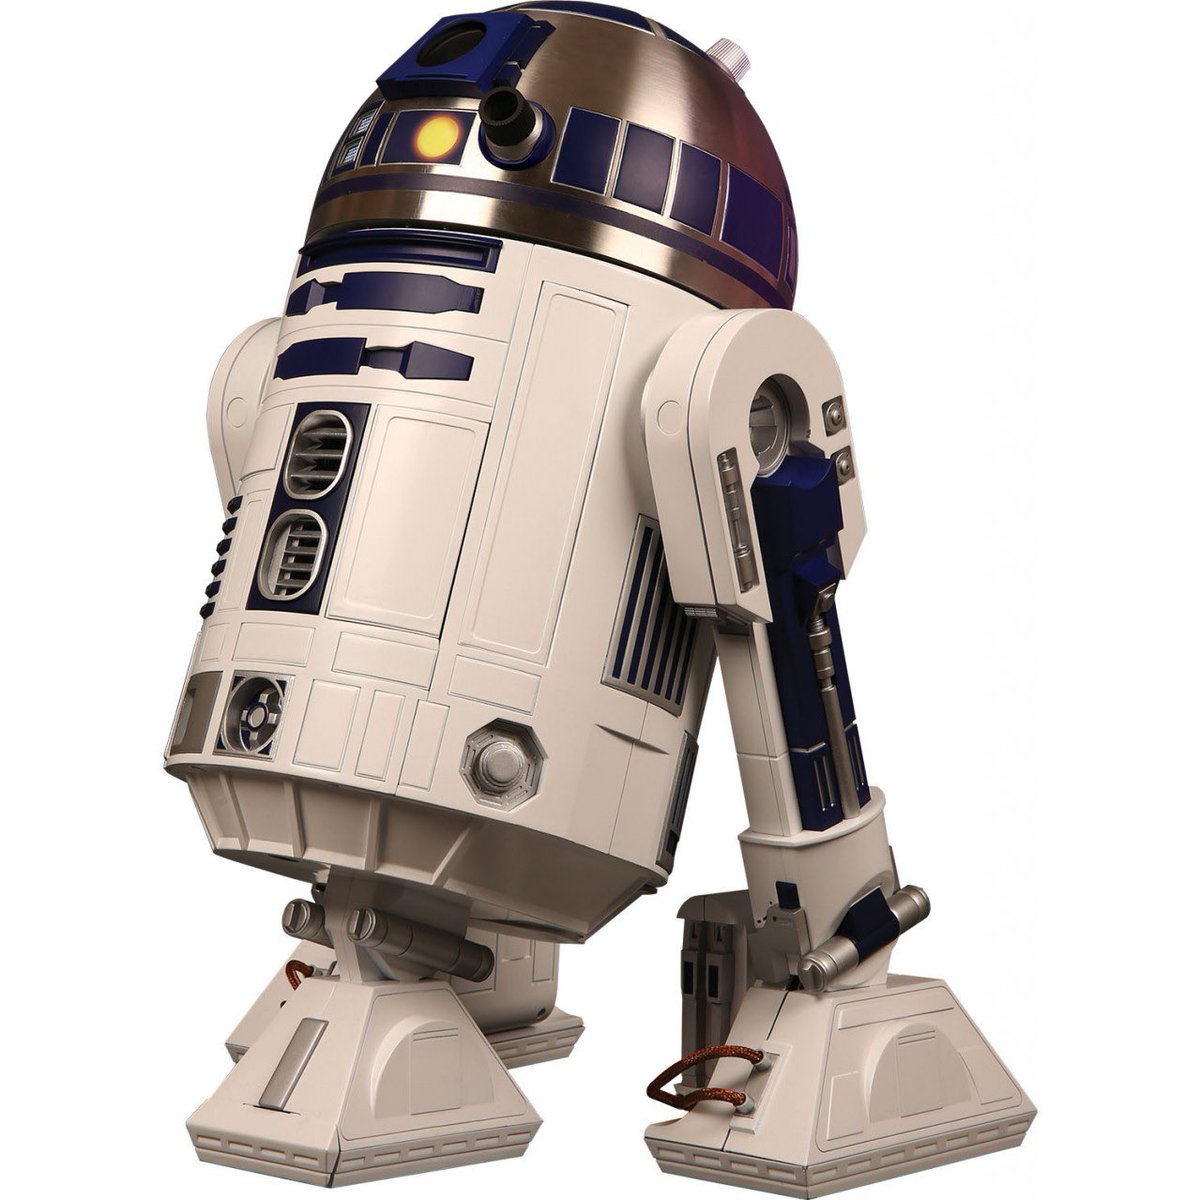 R2D2 shows up ten minutes late with the iced latte that is the reason he’s late and he doesn’t even try and hide it